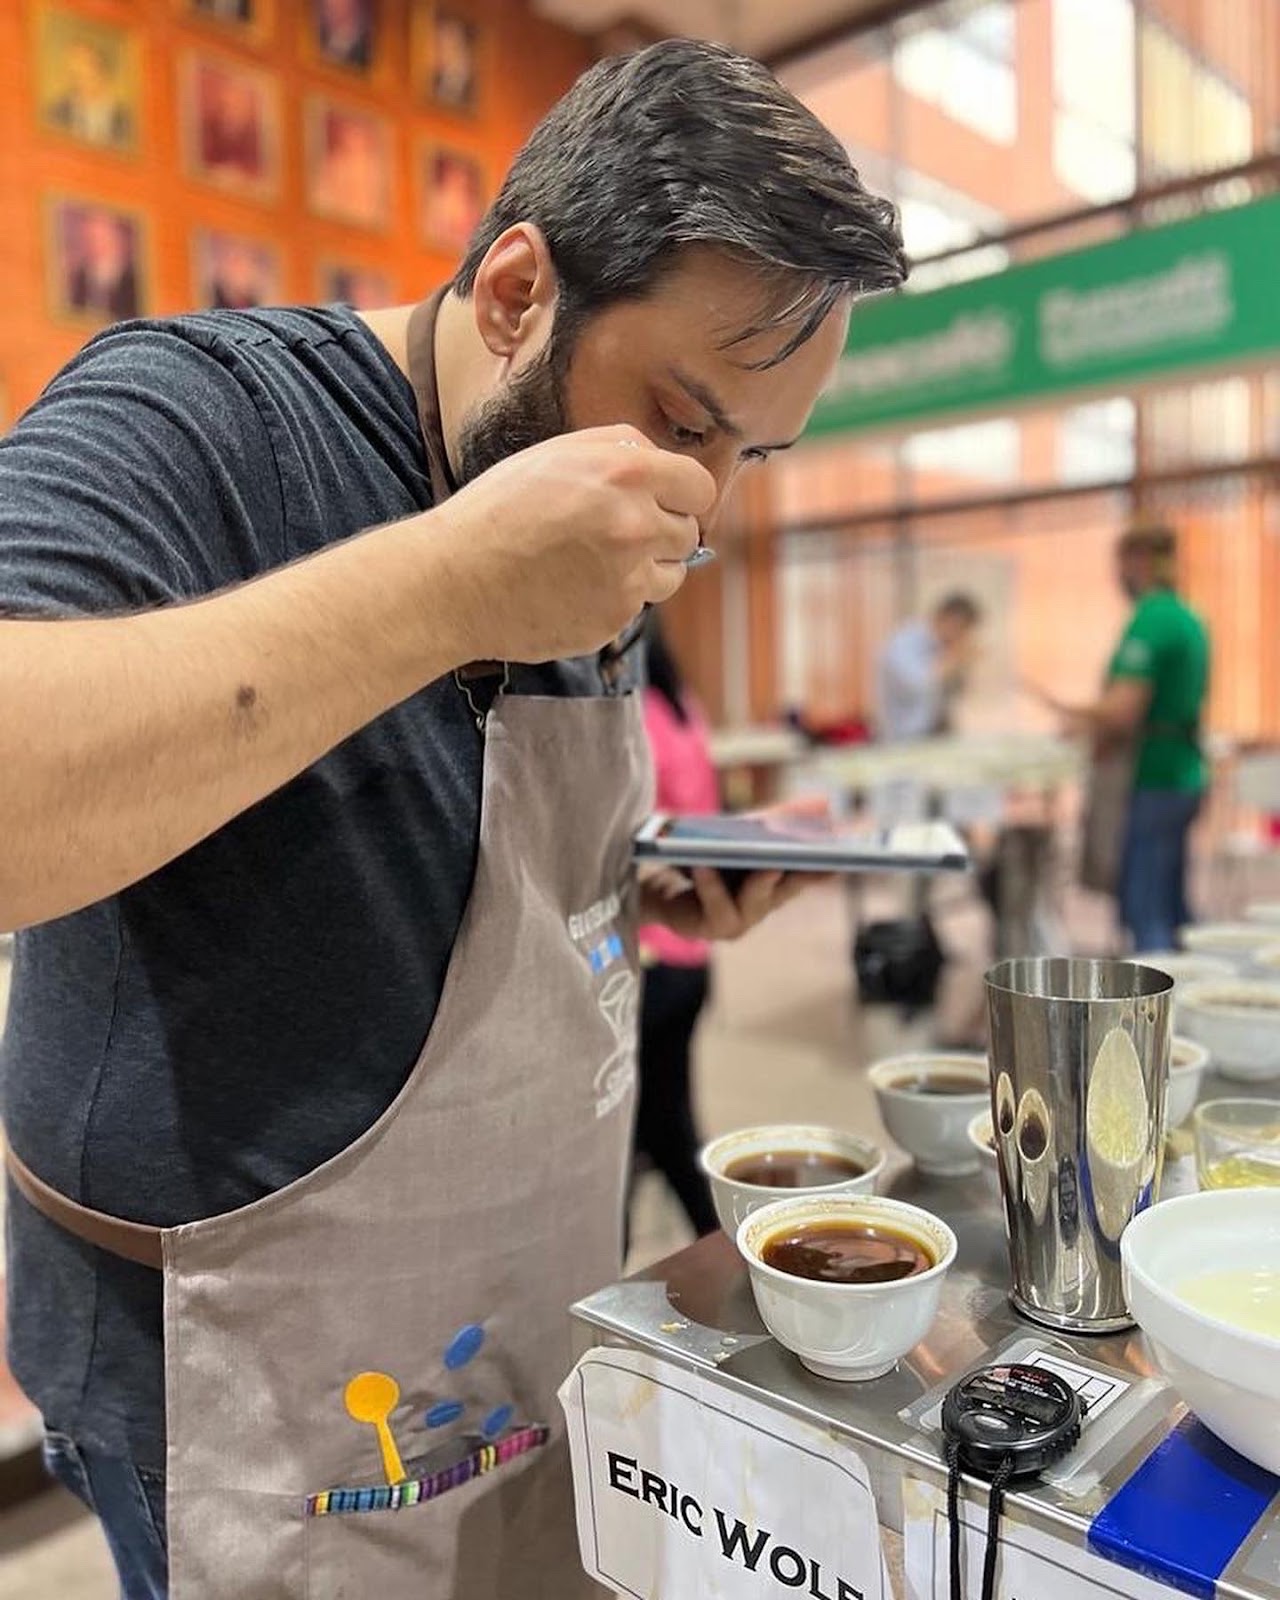 Little City Director of Coffee Eric Wolf cupping coffees at the Cup of Excellence Guatemala 2022